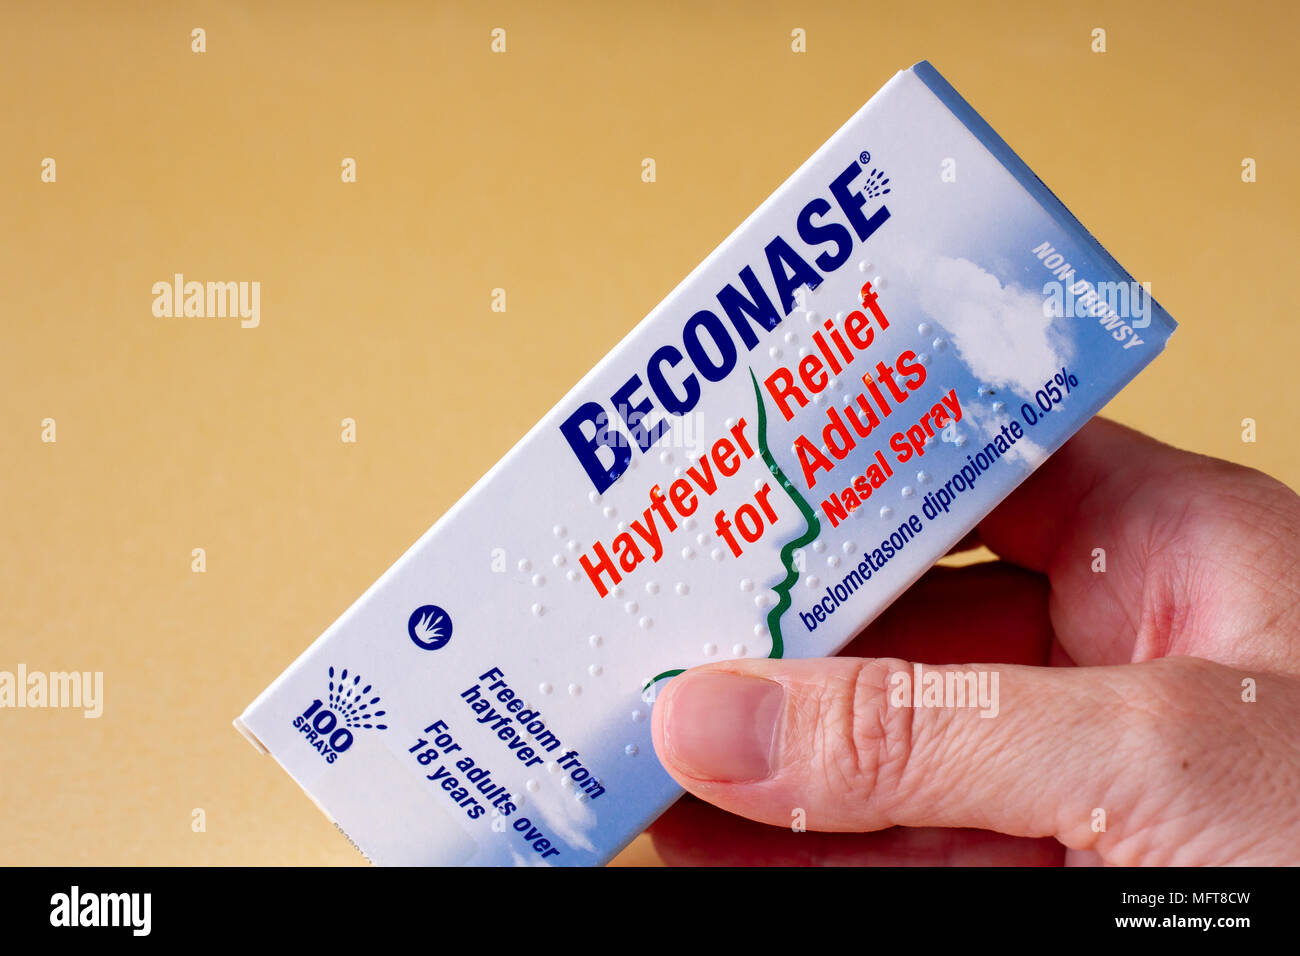 Female hand holding a box containing a Beconase nasal spray, hayfever allergy relief, United Kingdom Stock Photo